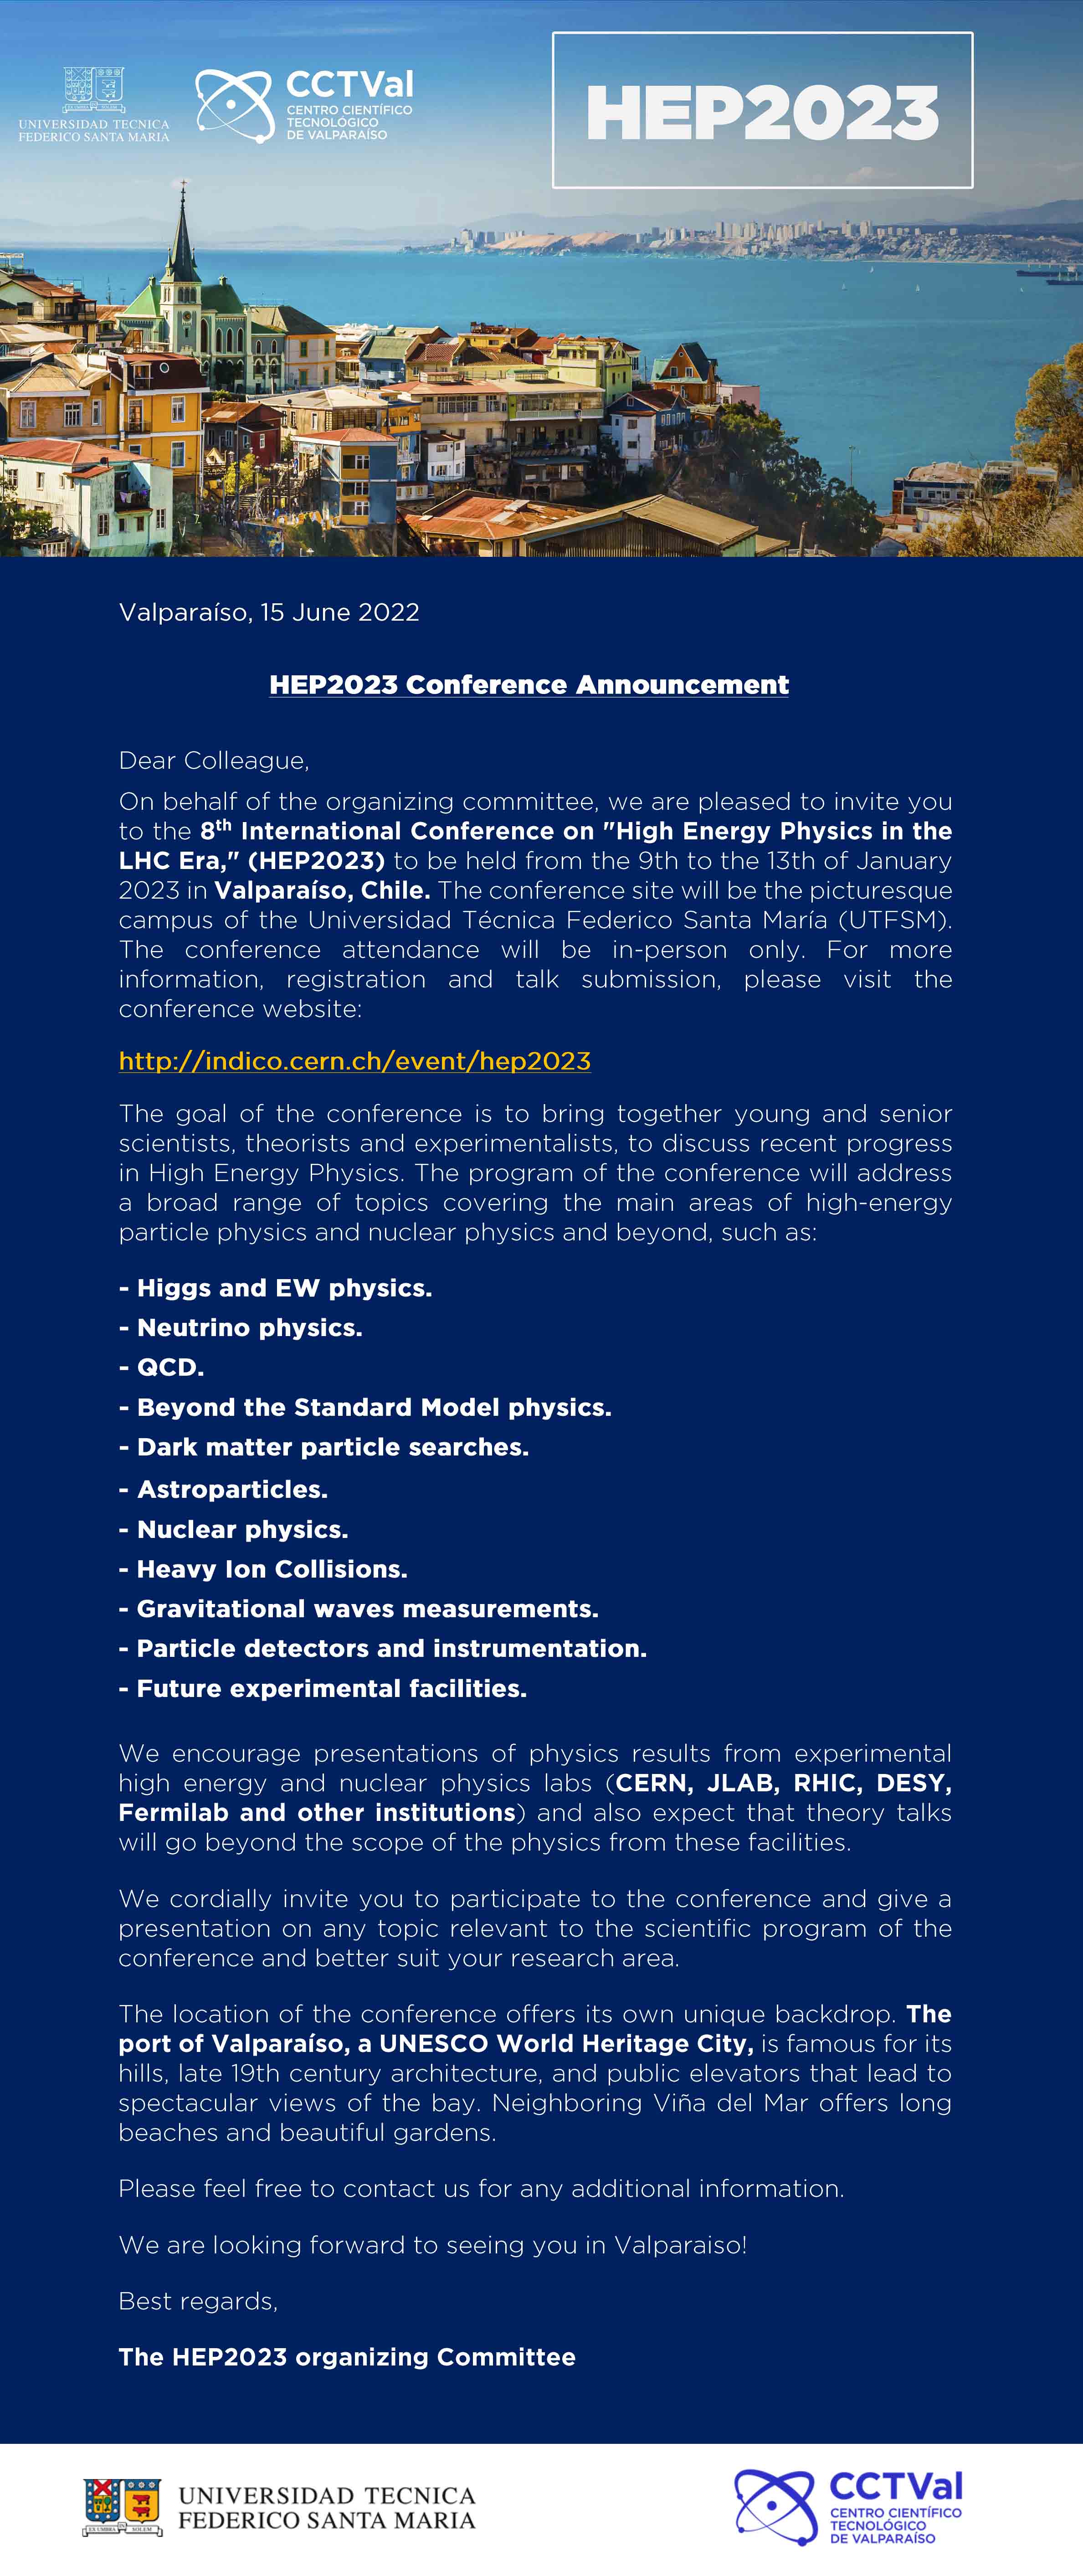 HEP2023. Valparaíso, 15 June 2022. HEP2023 Conference Announcement. Dear Colleague, On behalf of the organizing comittee, we are pleased to invite you to the 8th International Conference on High Energy Physics in the LHC Era (HEP2023) to be held from the 9th to the 13th of January 2023 in Valparaíso, Chile. The conference site will be the picturesque campus of the Universidad Técnica Federico Santa María (UTFSM). The conference attendance will be in-person only. For more information, registration and talk submission, please visit the conference website: http://indico.cern.ch/event/hep2023 The goal of the conference is to bring together young and senior scientists, theorists and experimentalists, to discuss recent progress in High Energy Physics. The program of the conference will address a broad range of topics covering the main areas of high-energy particle physics and nuclear physics and beyond, such as: Higgs and EW physics, neutrino physics, QCD, Beyond the standard model physics, dark matter particle searches, astroparticles, nuclear physics, heavy ion collisions, gravitational waves measurements, particle detectors and instrumentation, future experimental facilities. We encourage presentations of physics results from experimental high energy and nuclear physics lab (CERN, JLAB, RHIC, DESY, Fermilab and other institutions) and also expect that theory talks will go beyond the scope of the physics from these facilities. We cordially invite you to participate to the conference and give a presentation on any topic relevant to the scientific program of the conference and better suit your research area. The location of the conference offers its own unique backdrop. The port of Valparaíso, a UNESCO World Heritage City, is famous for its hills, late 19th century architecture and public elevators that lead to spectacular views of the bay. Neighboring Viña del Mar offers long beaches and beautiful gardens. Please feel free to contact us for any additional information. We are looking forward to seeing you in Valparaíso! Best regards, The HEP2023 organizing comittee.